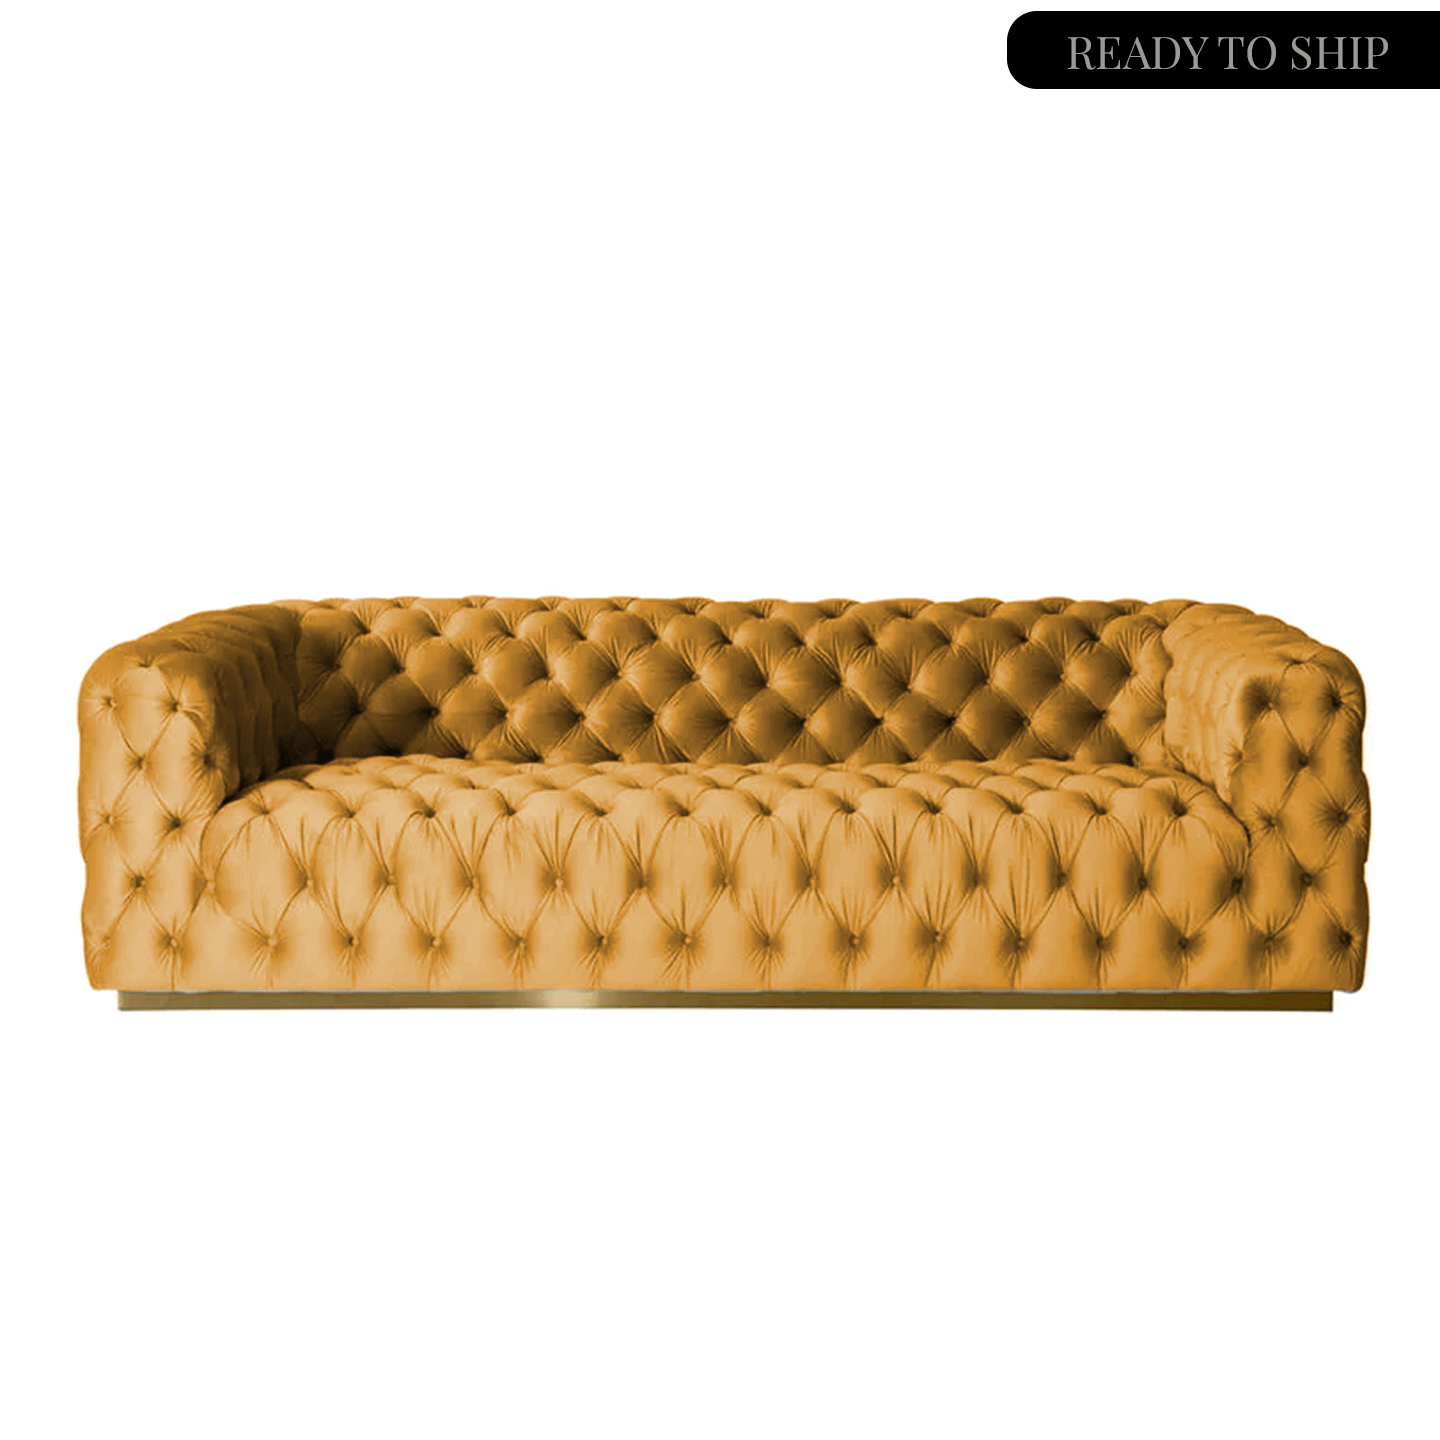 Leatherette Chesterfield Sofa in Tan